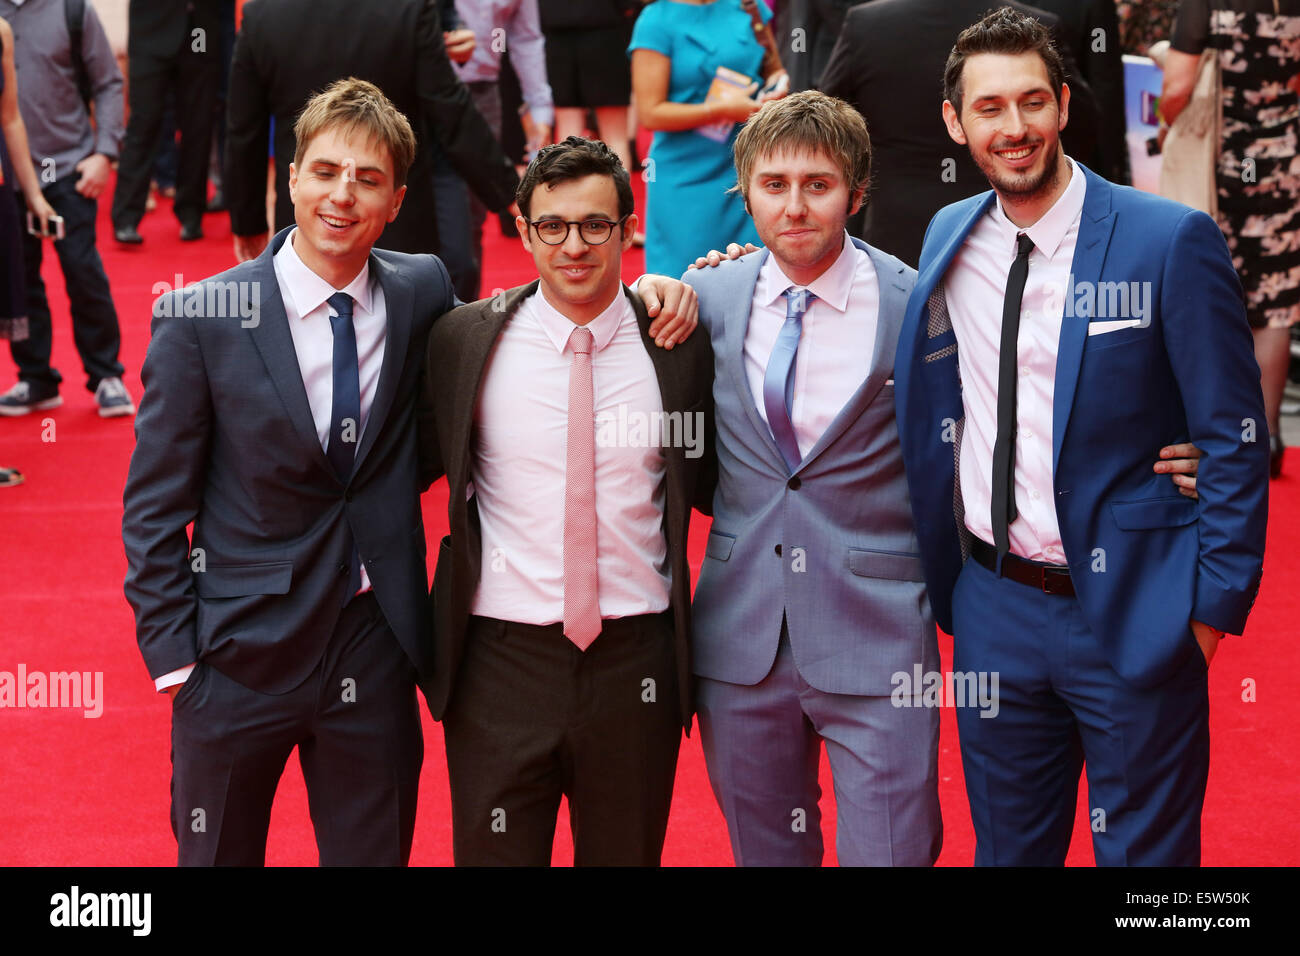 London, UK. 5th Aug, 2014. Simon Bird, James Buckley, Blake Harrison & Joe Thomas attends The World Premiere of The Inbetweeners 2 on 05/08/2014 at The VUE Leicester Square, London. Persons pictured: Simon Bird, James Buckley, Blake Harrison, Joe Thomas. Credit:  swift-creative/Alamy Live News Stock Photo